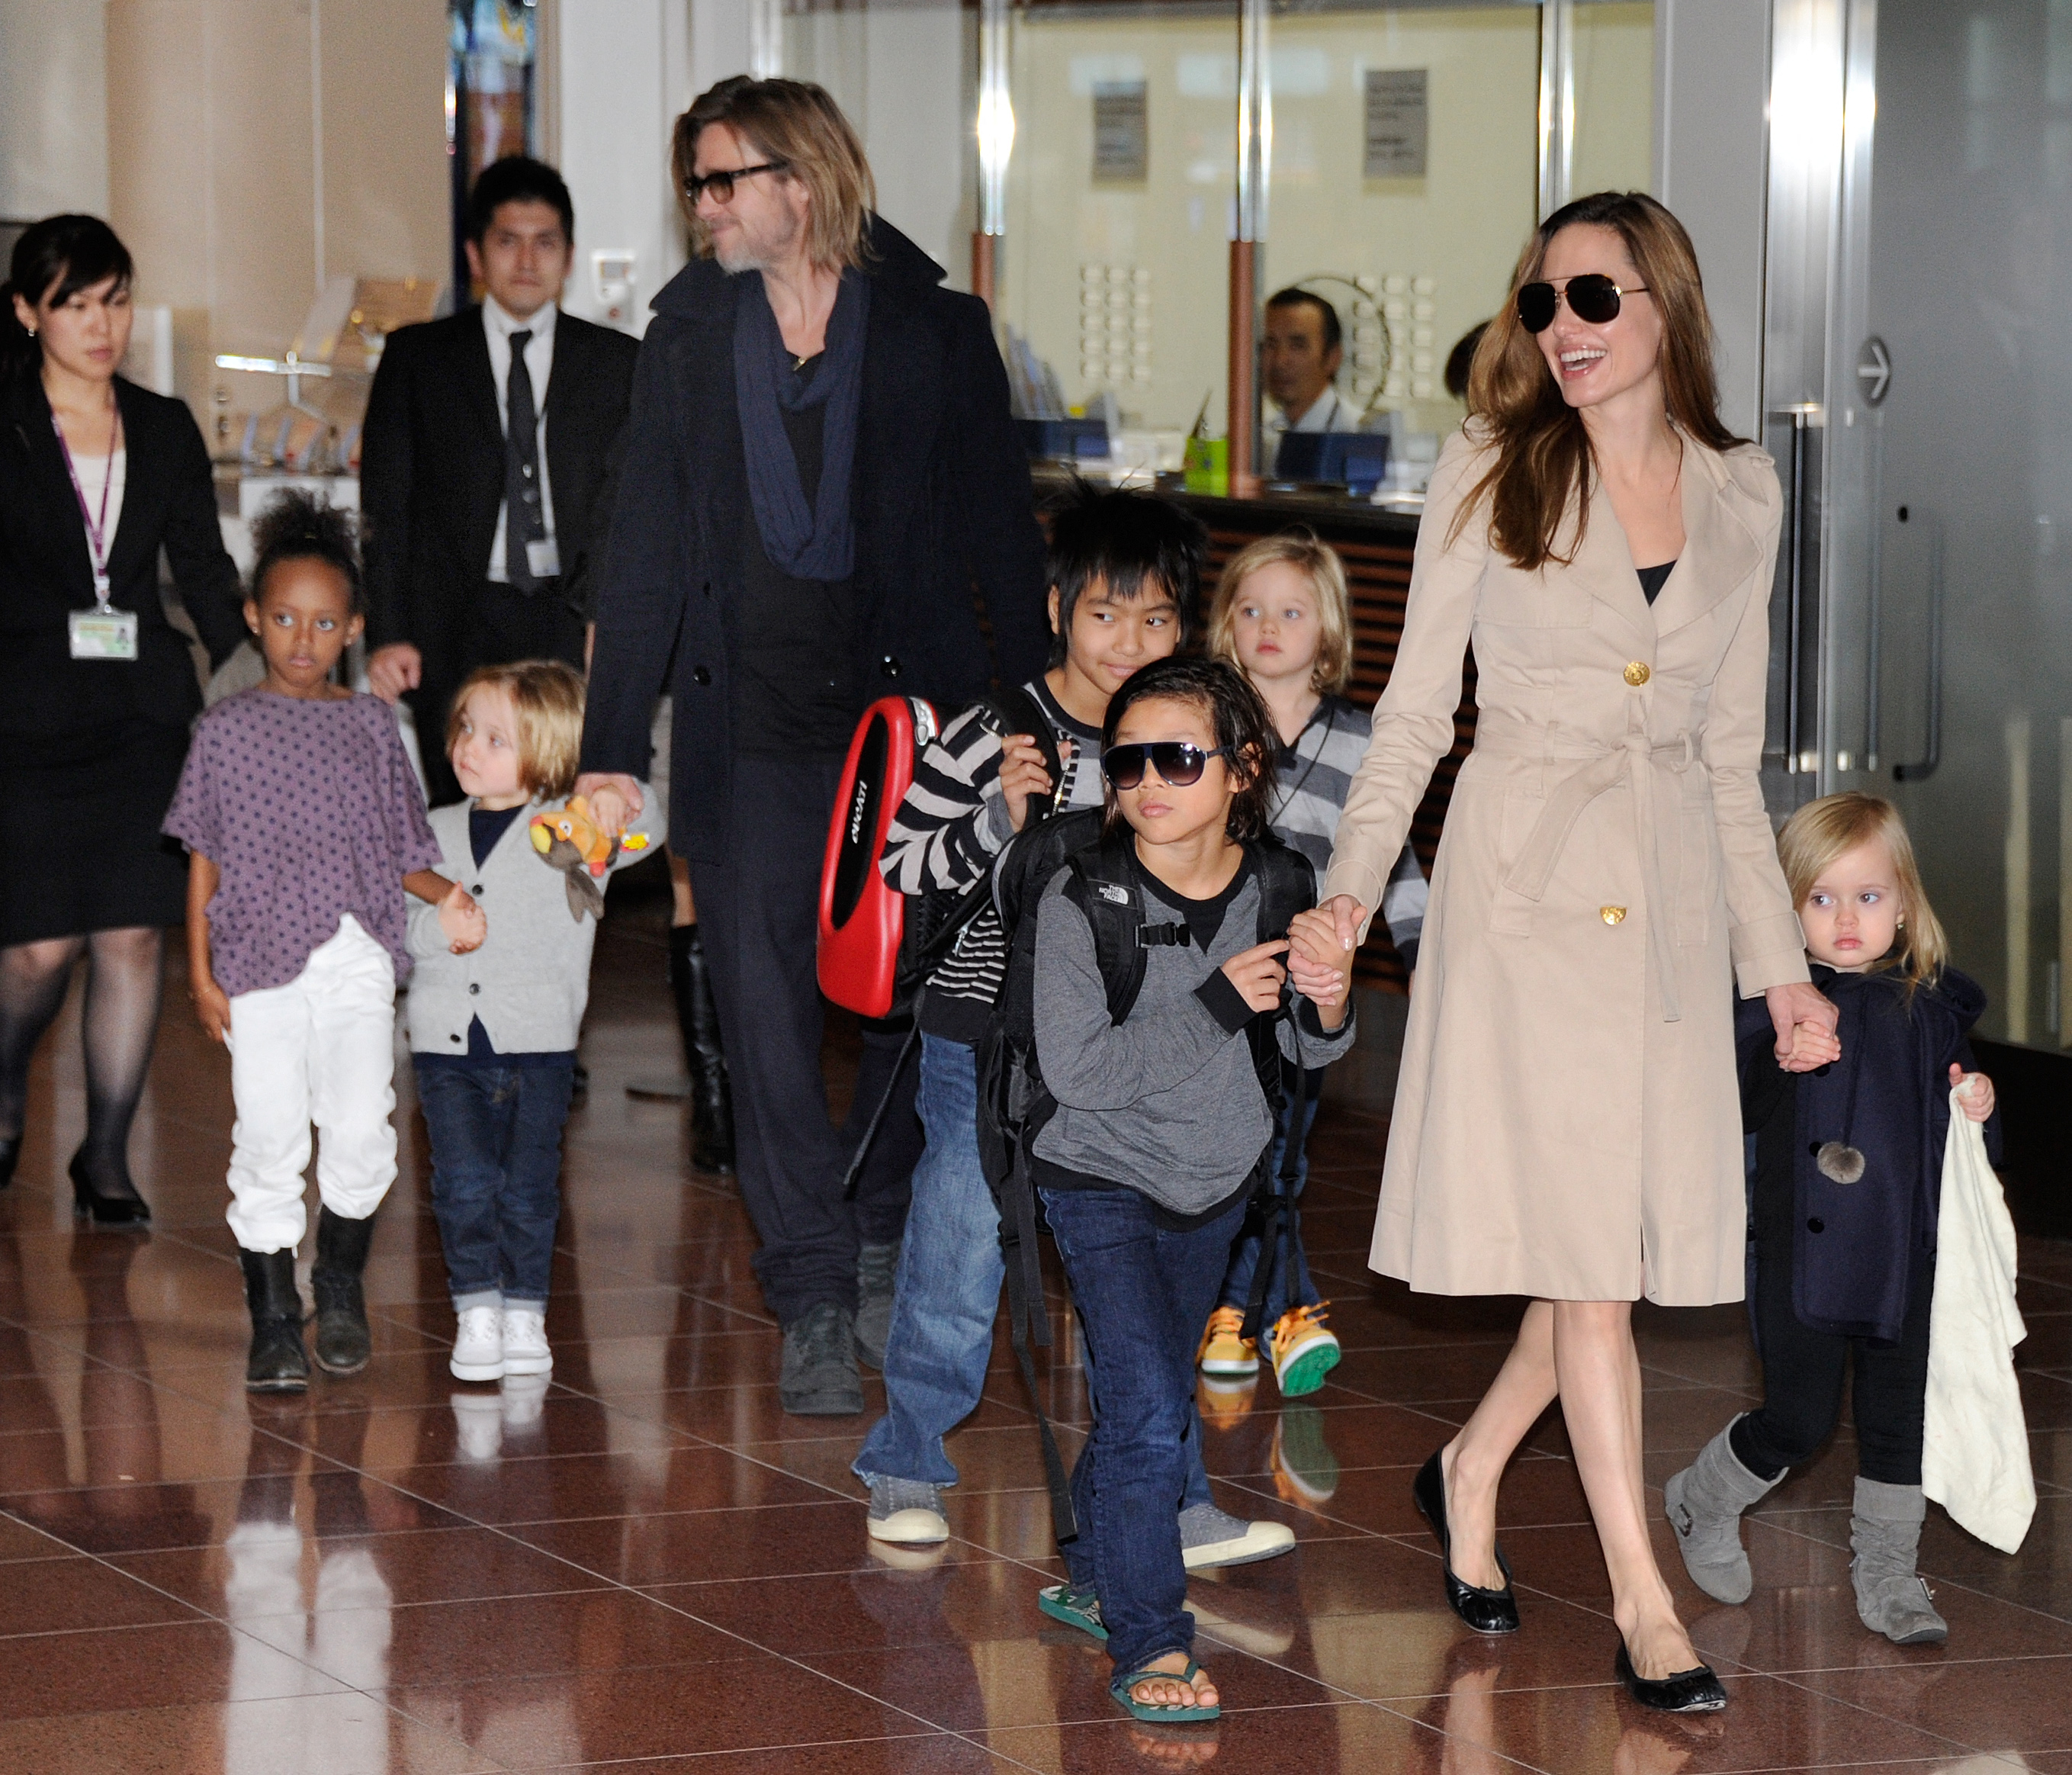 Brad Pitt, Angelina Jolie and their six kids arrive at Haneda Airport in Tokyo on November 8, 2011. | Source: Getty Images